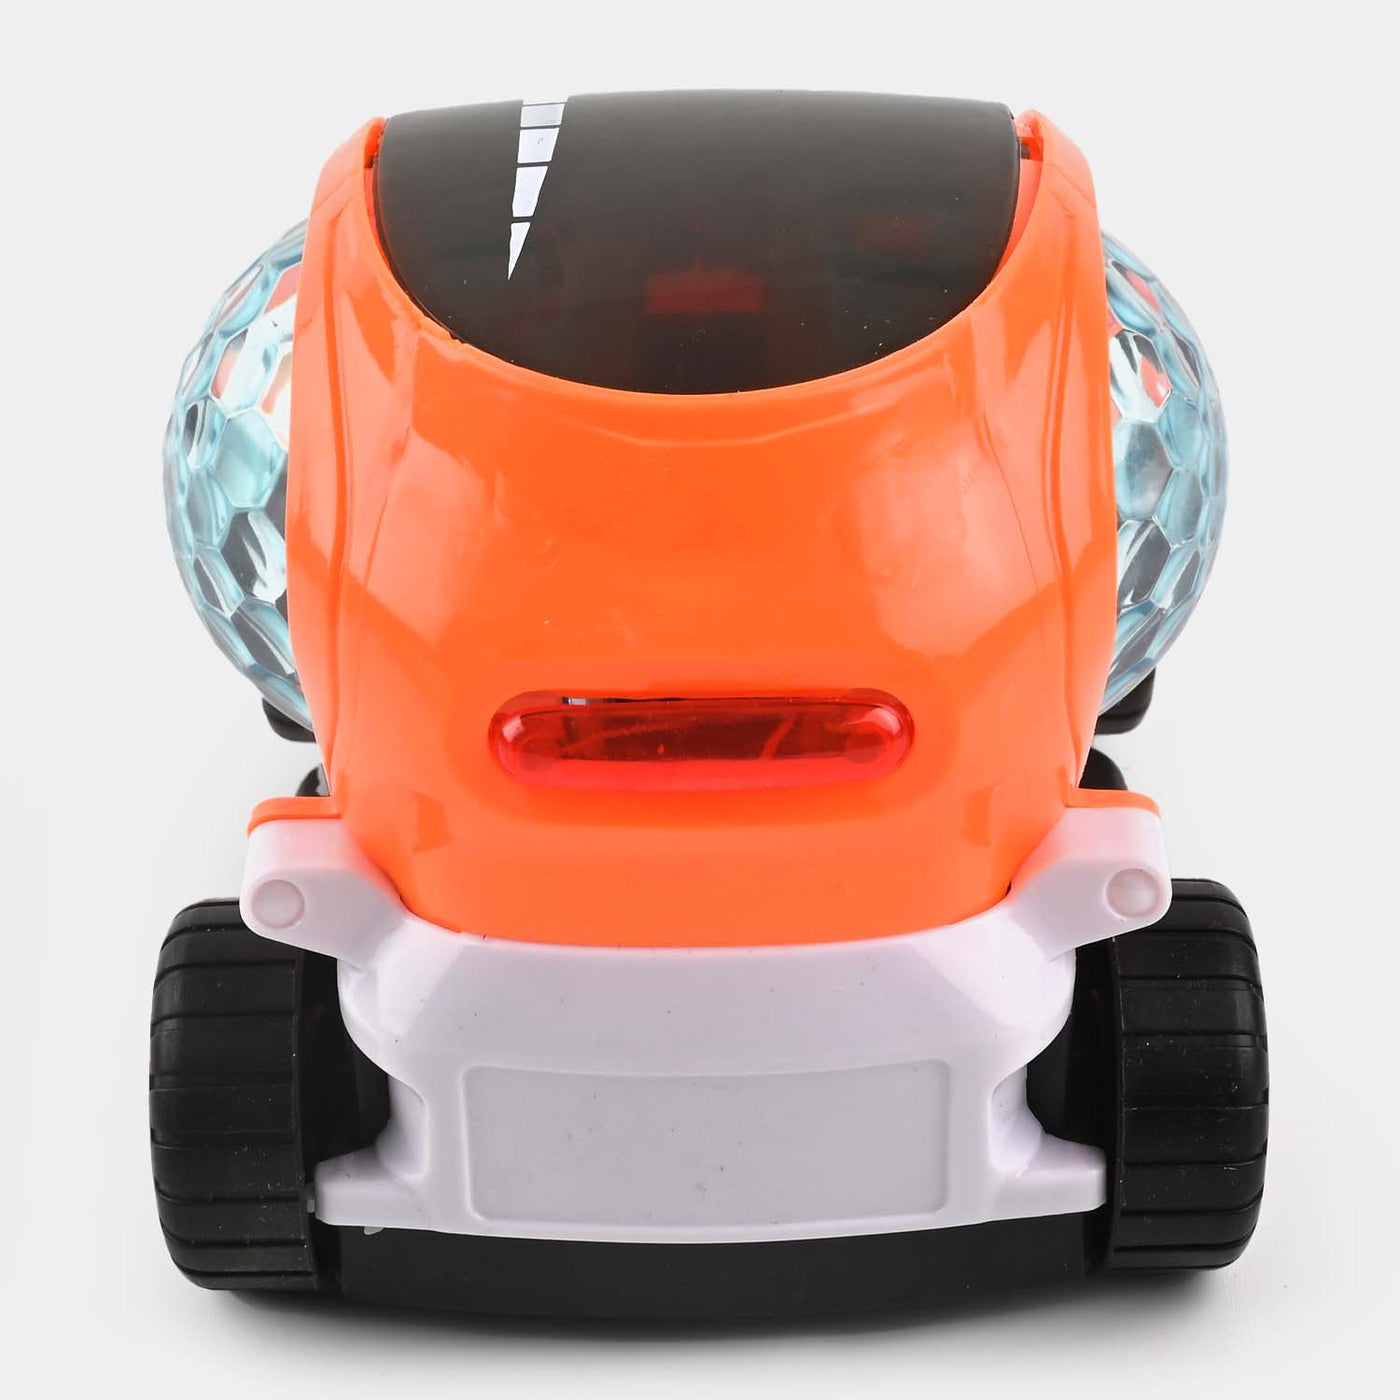 TRANSPARENT CAR WITH LIGHT & MUSIC FOR KIDS